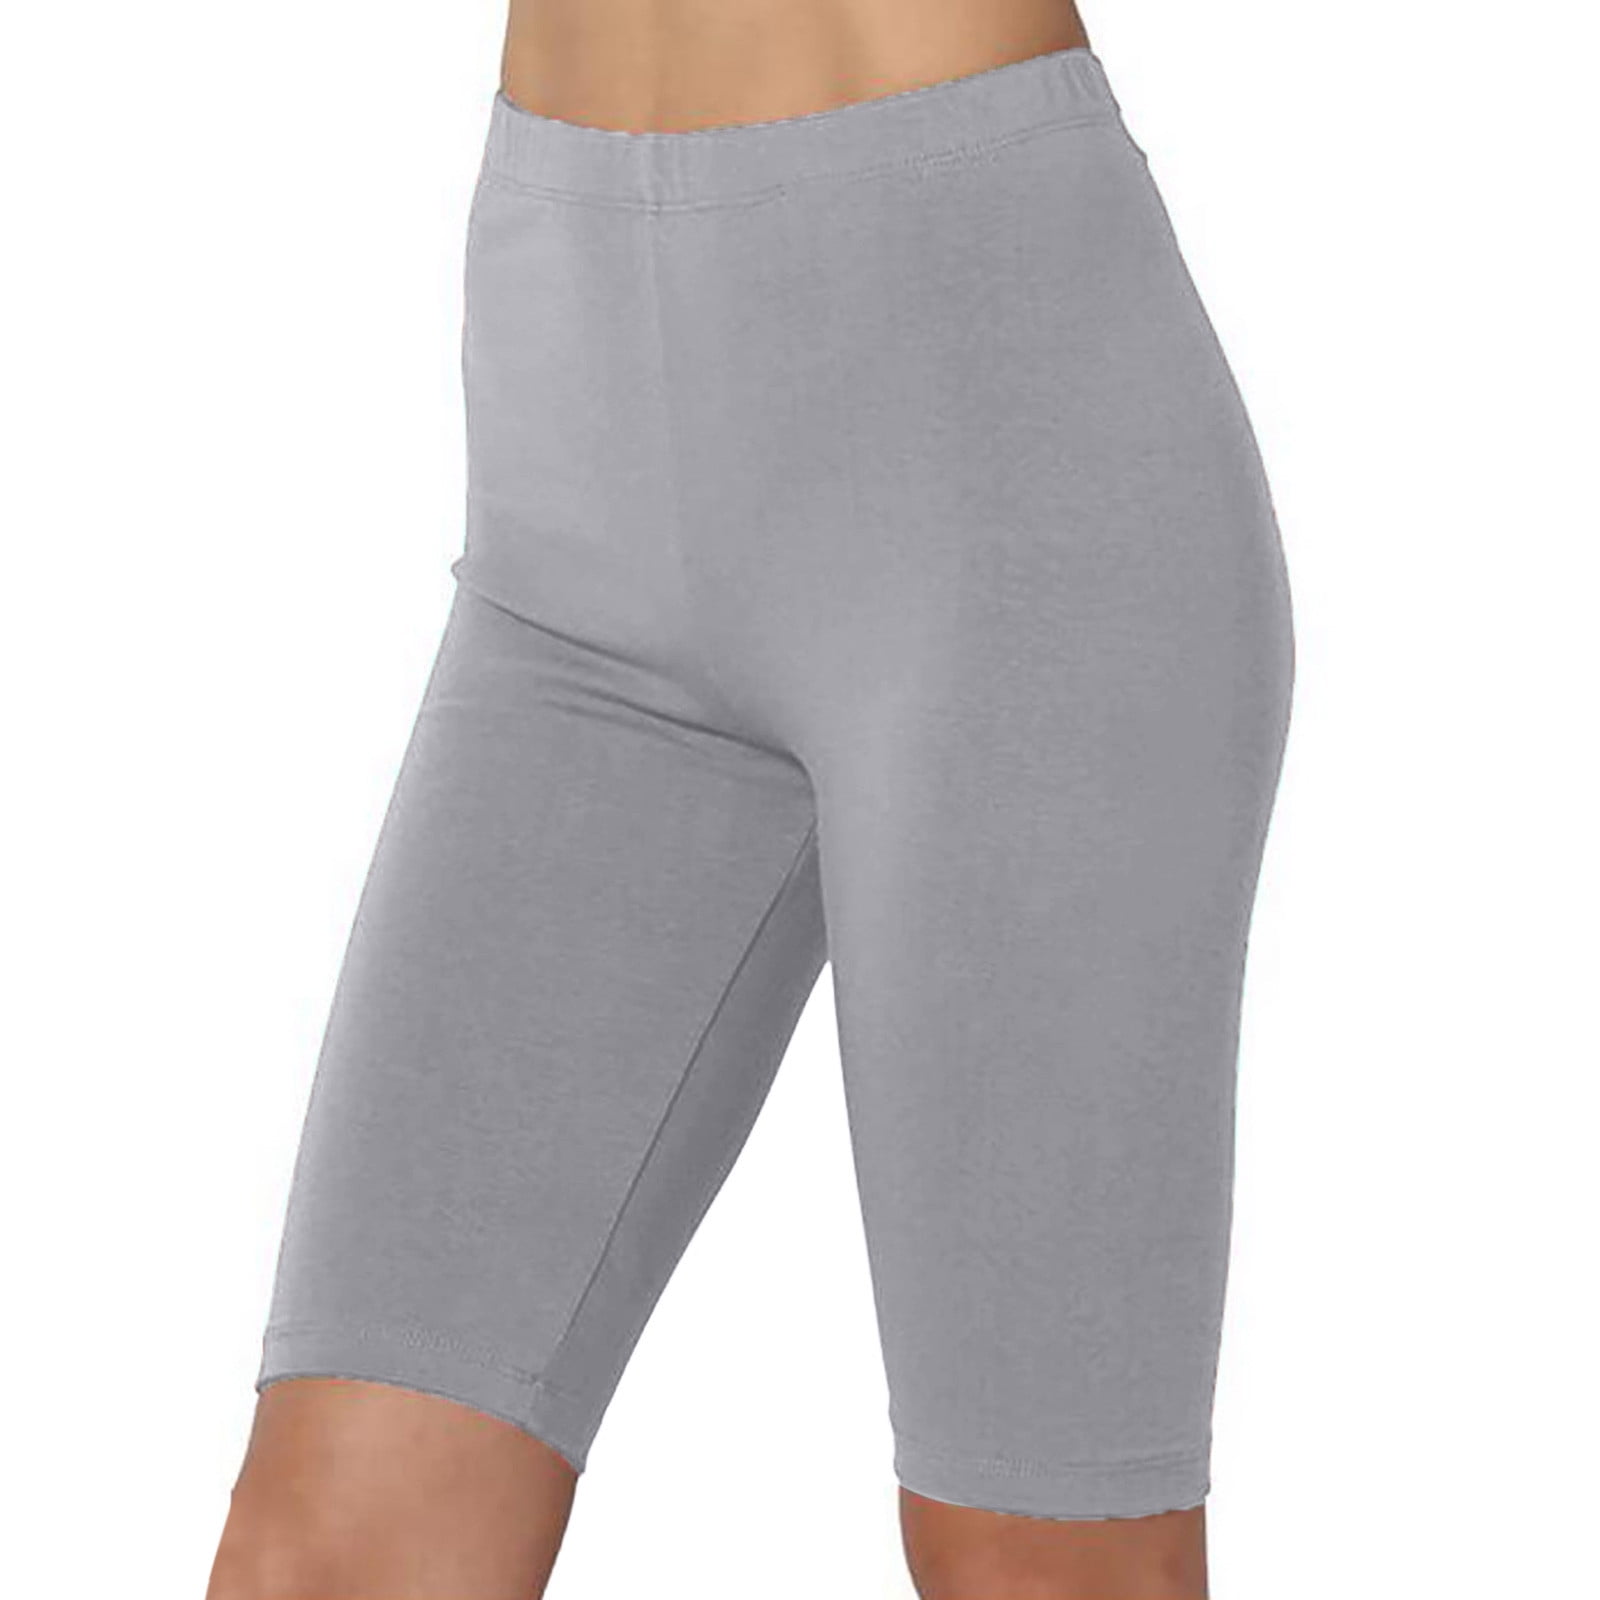 Womens Knee Length Shorts Spandex Stretch Yoga Active Workout